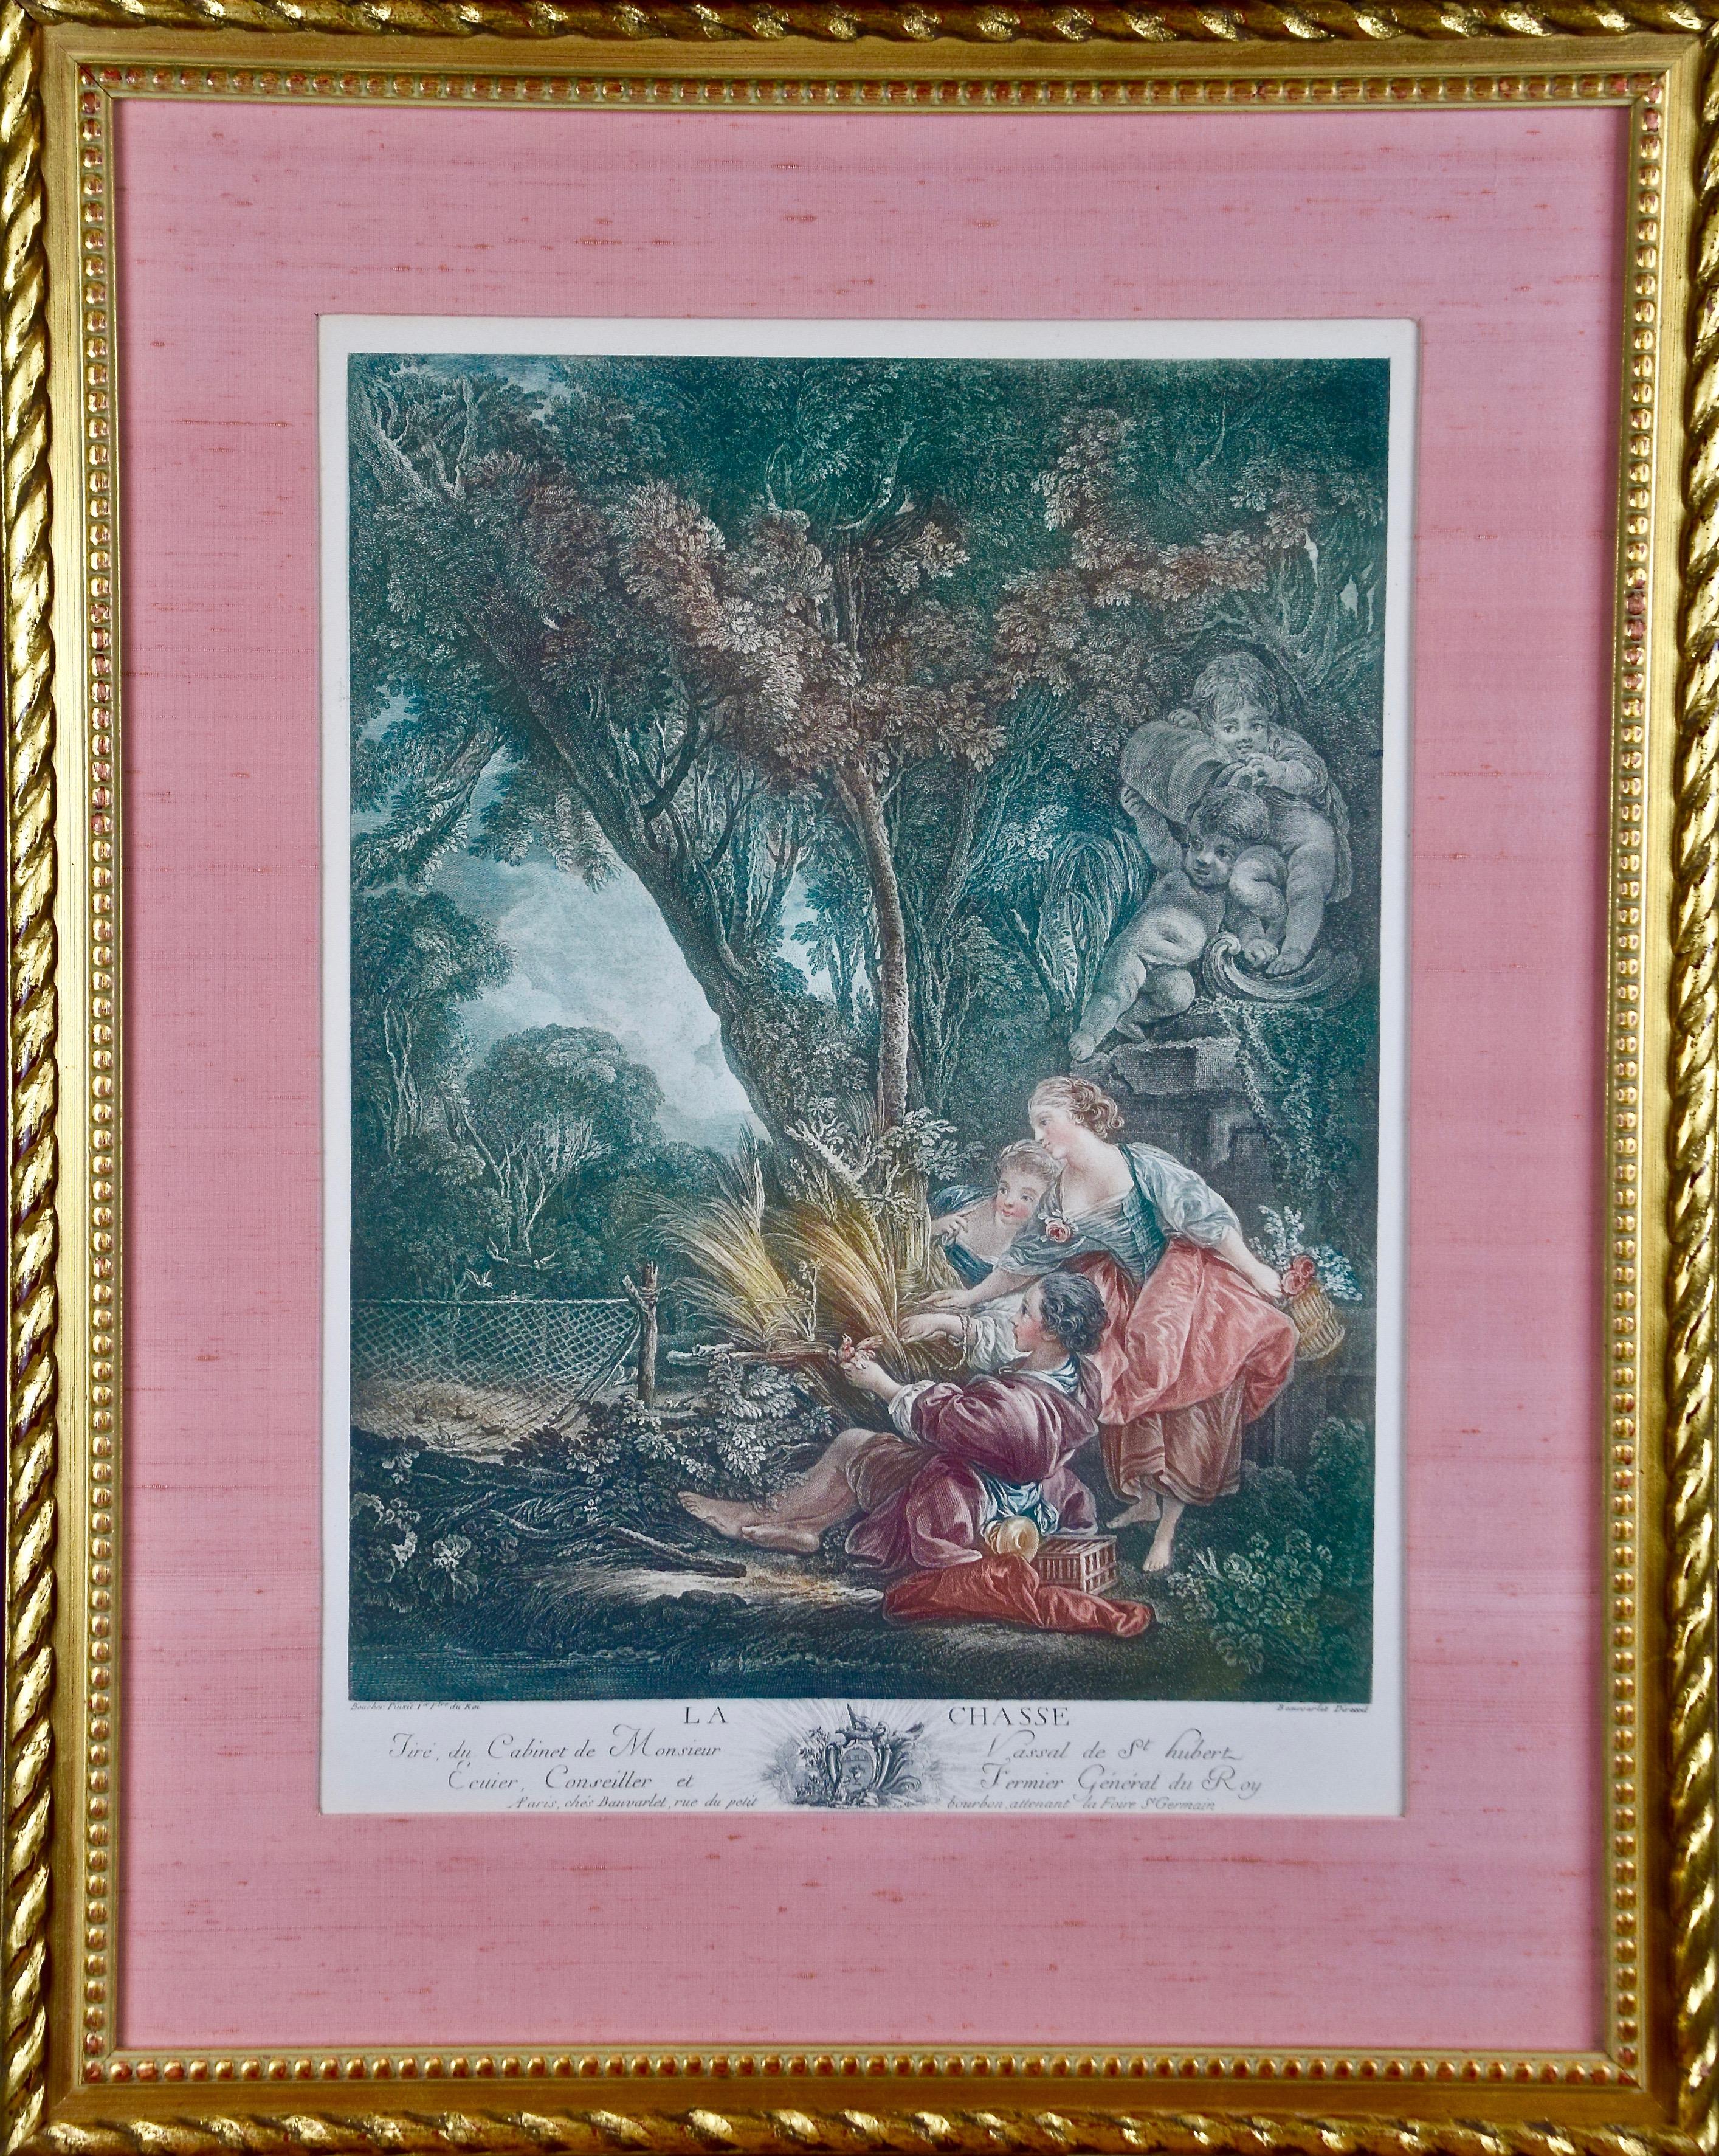 Pair of Hand-colored Romantic French Engravings after Francois Boucher  - Print by (After) Francois Boucher